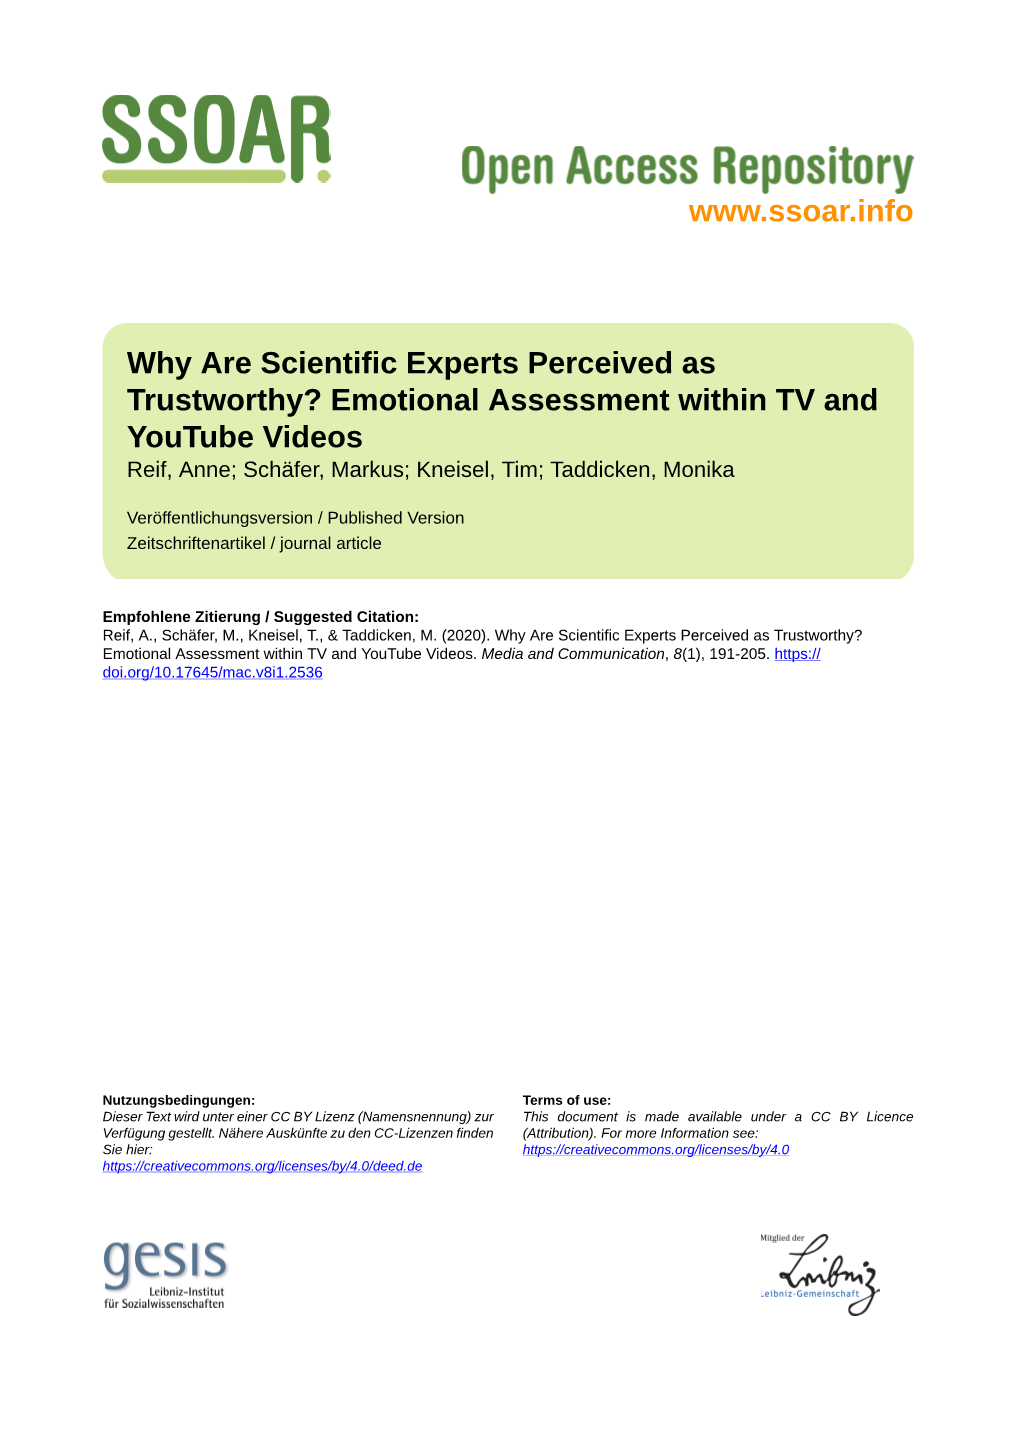 Why Are Scientific Experts Perceived As Trustworthy? Emotional Assessment Within TV and Youtube Videos Reif, Anne; Schäfer, Markus; Kneisel, Tim; Taddicken, Monika